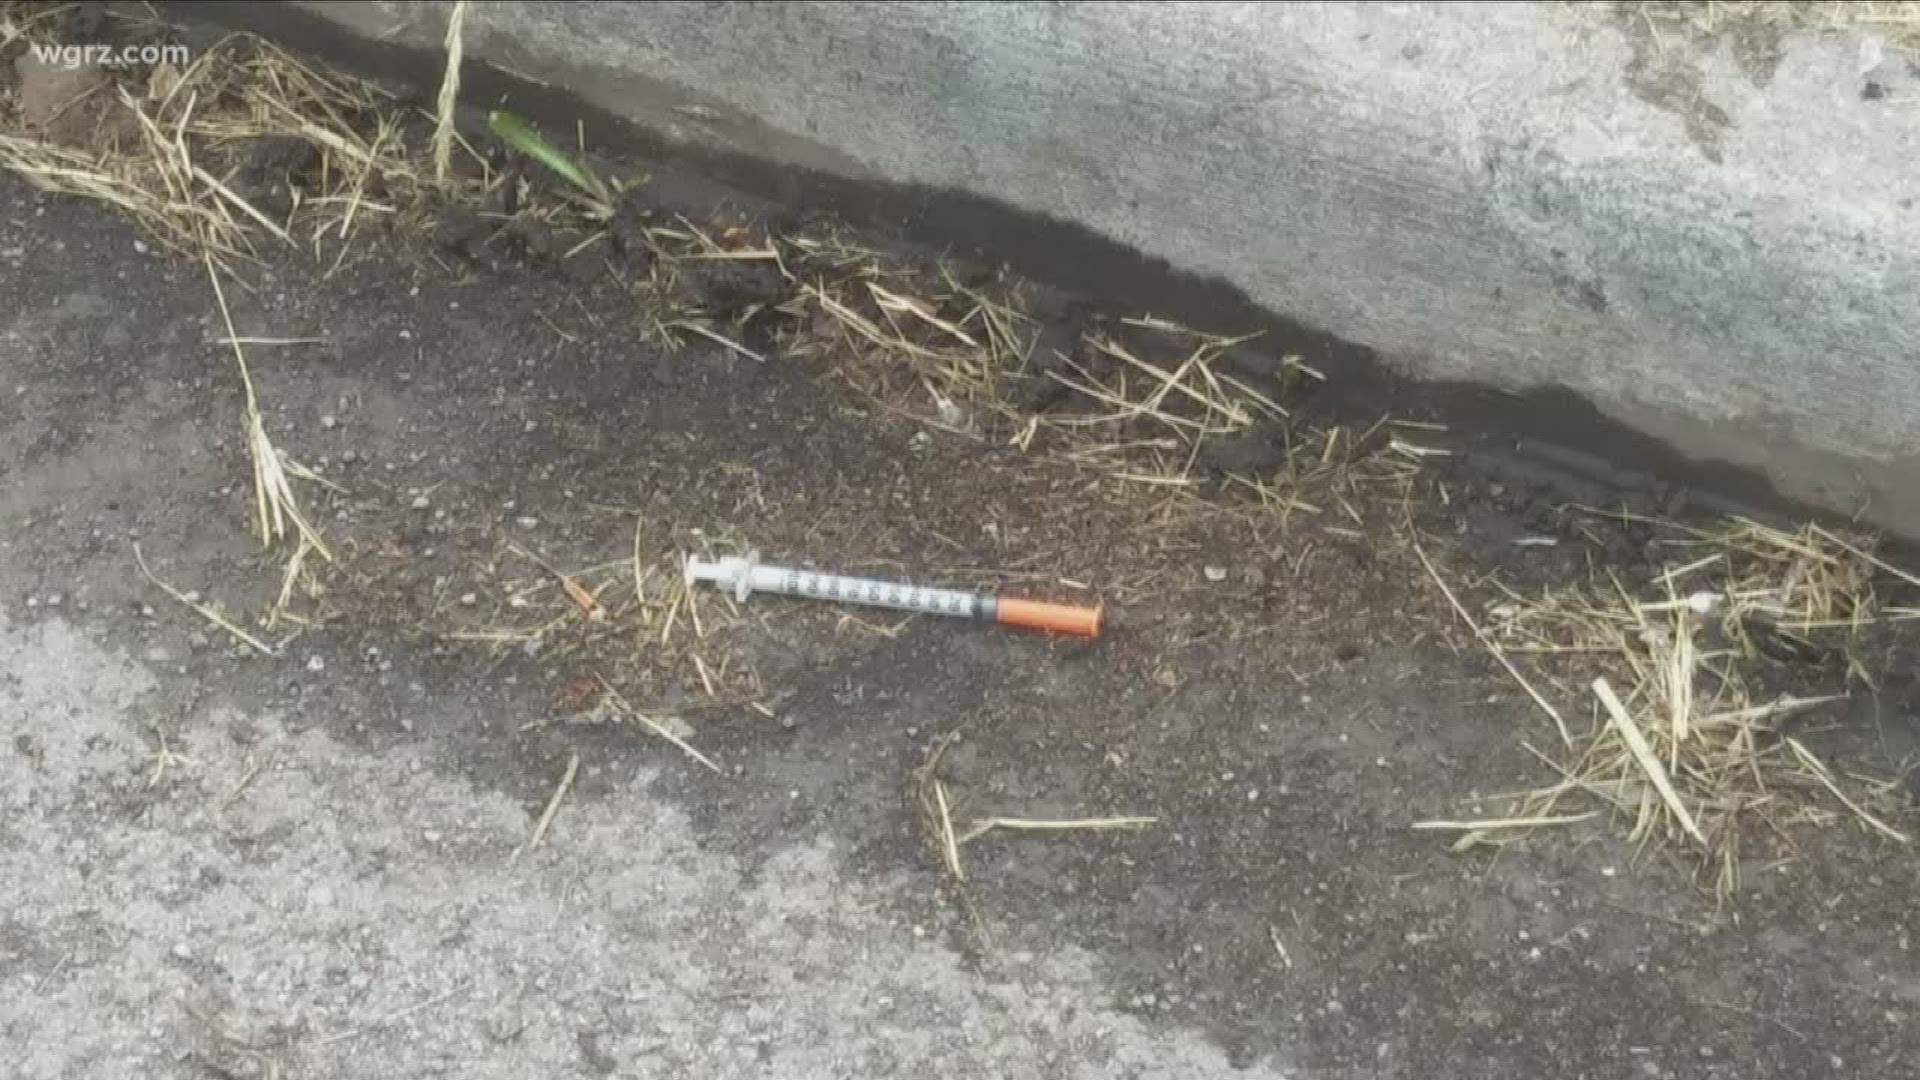 There is community concern over needles found at Lasalle Park